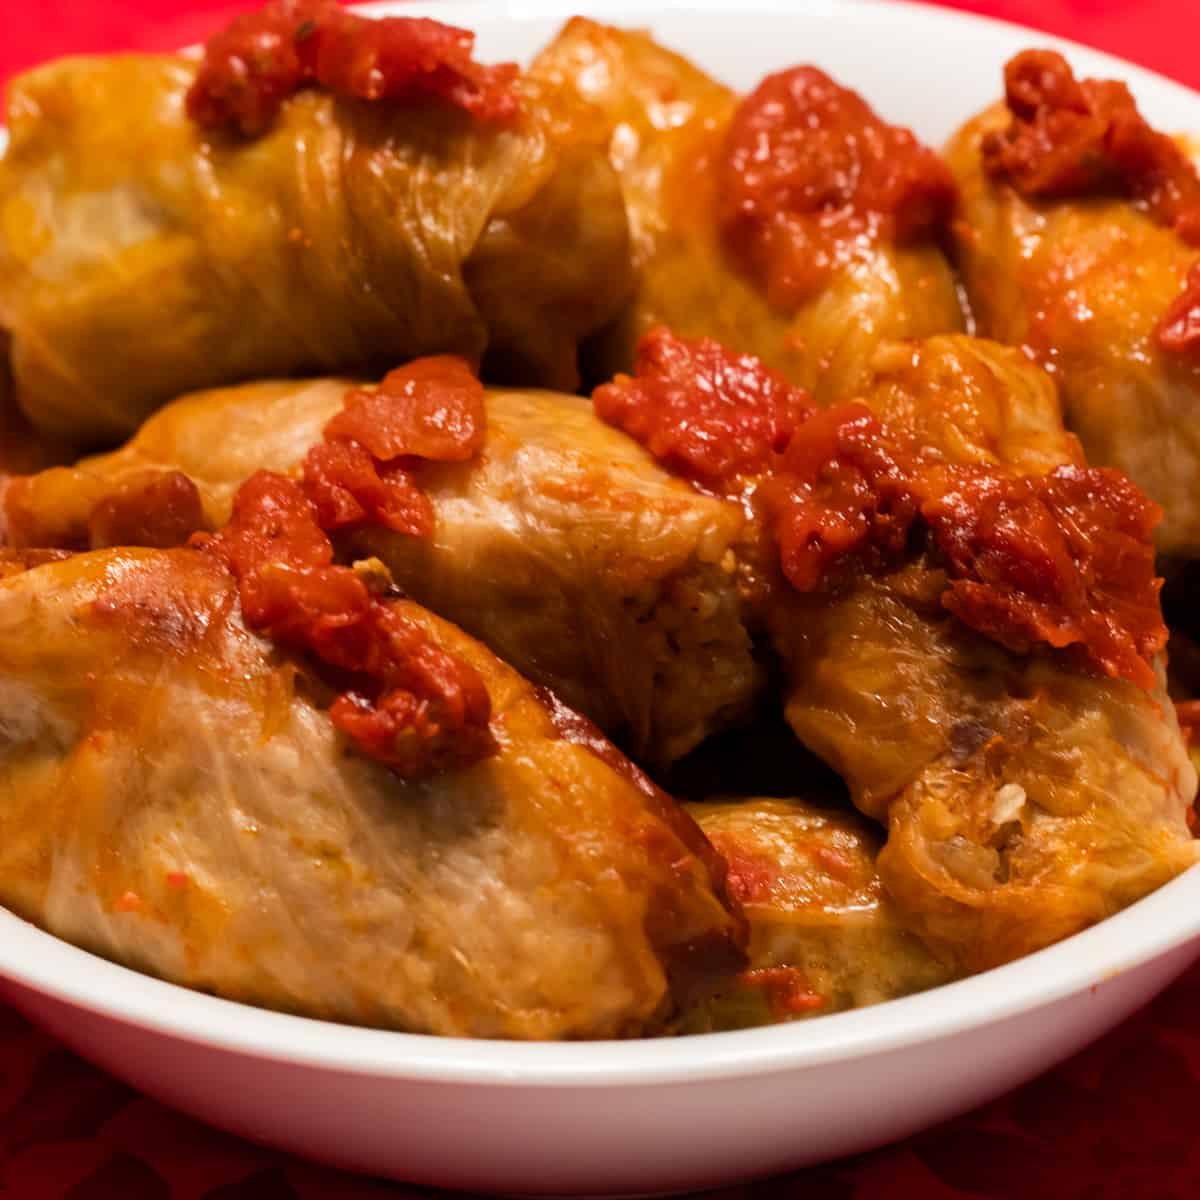 A serving bowl filled with cabbage rolls.